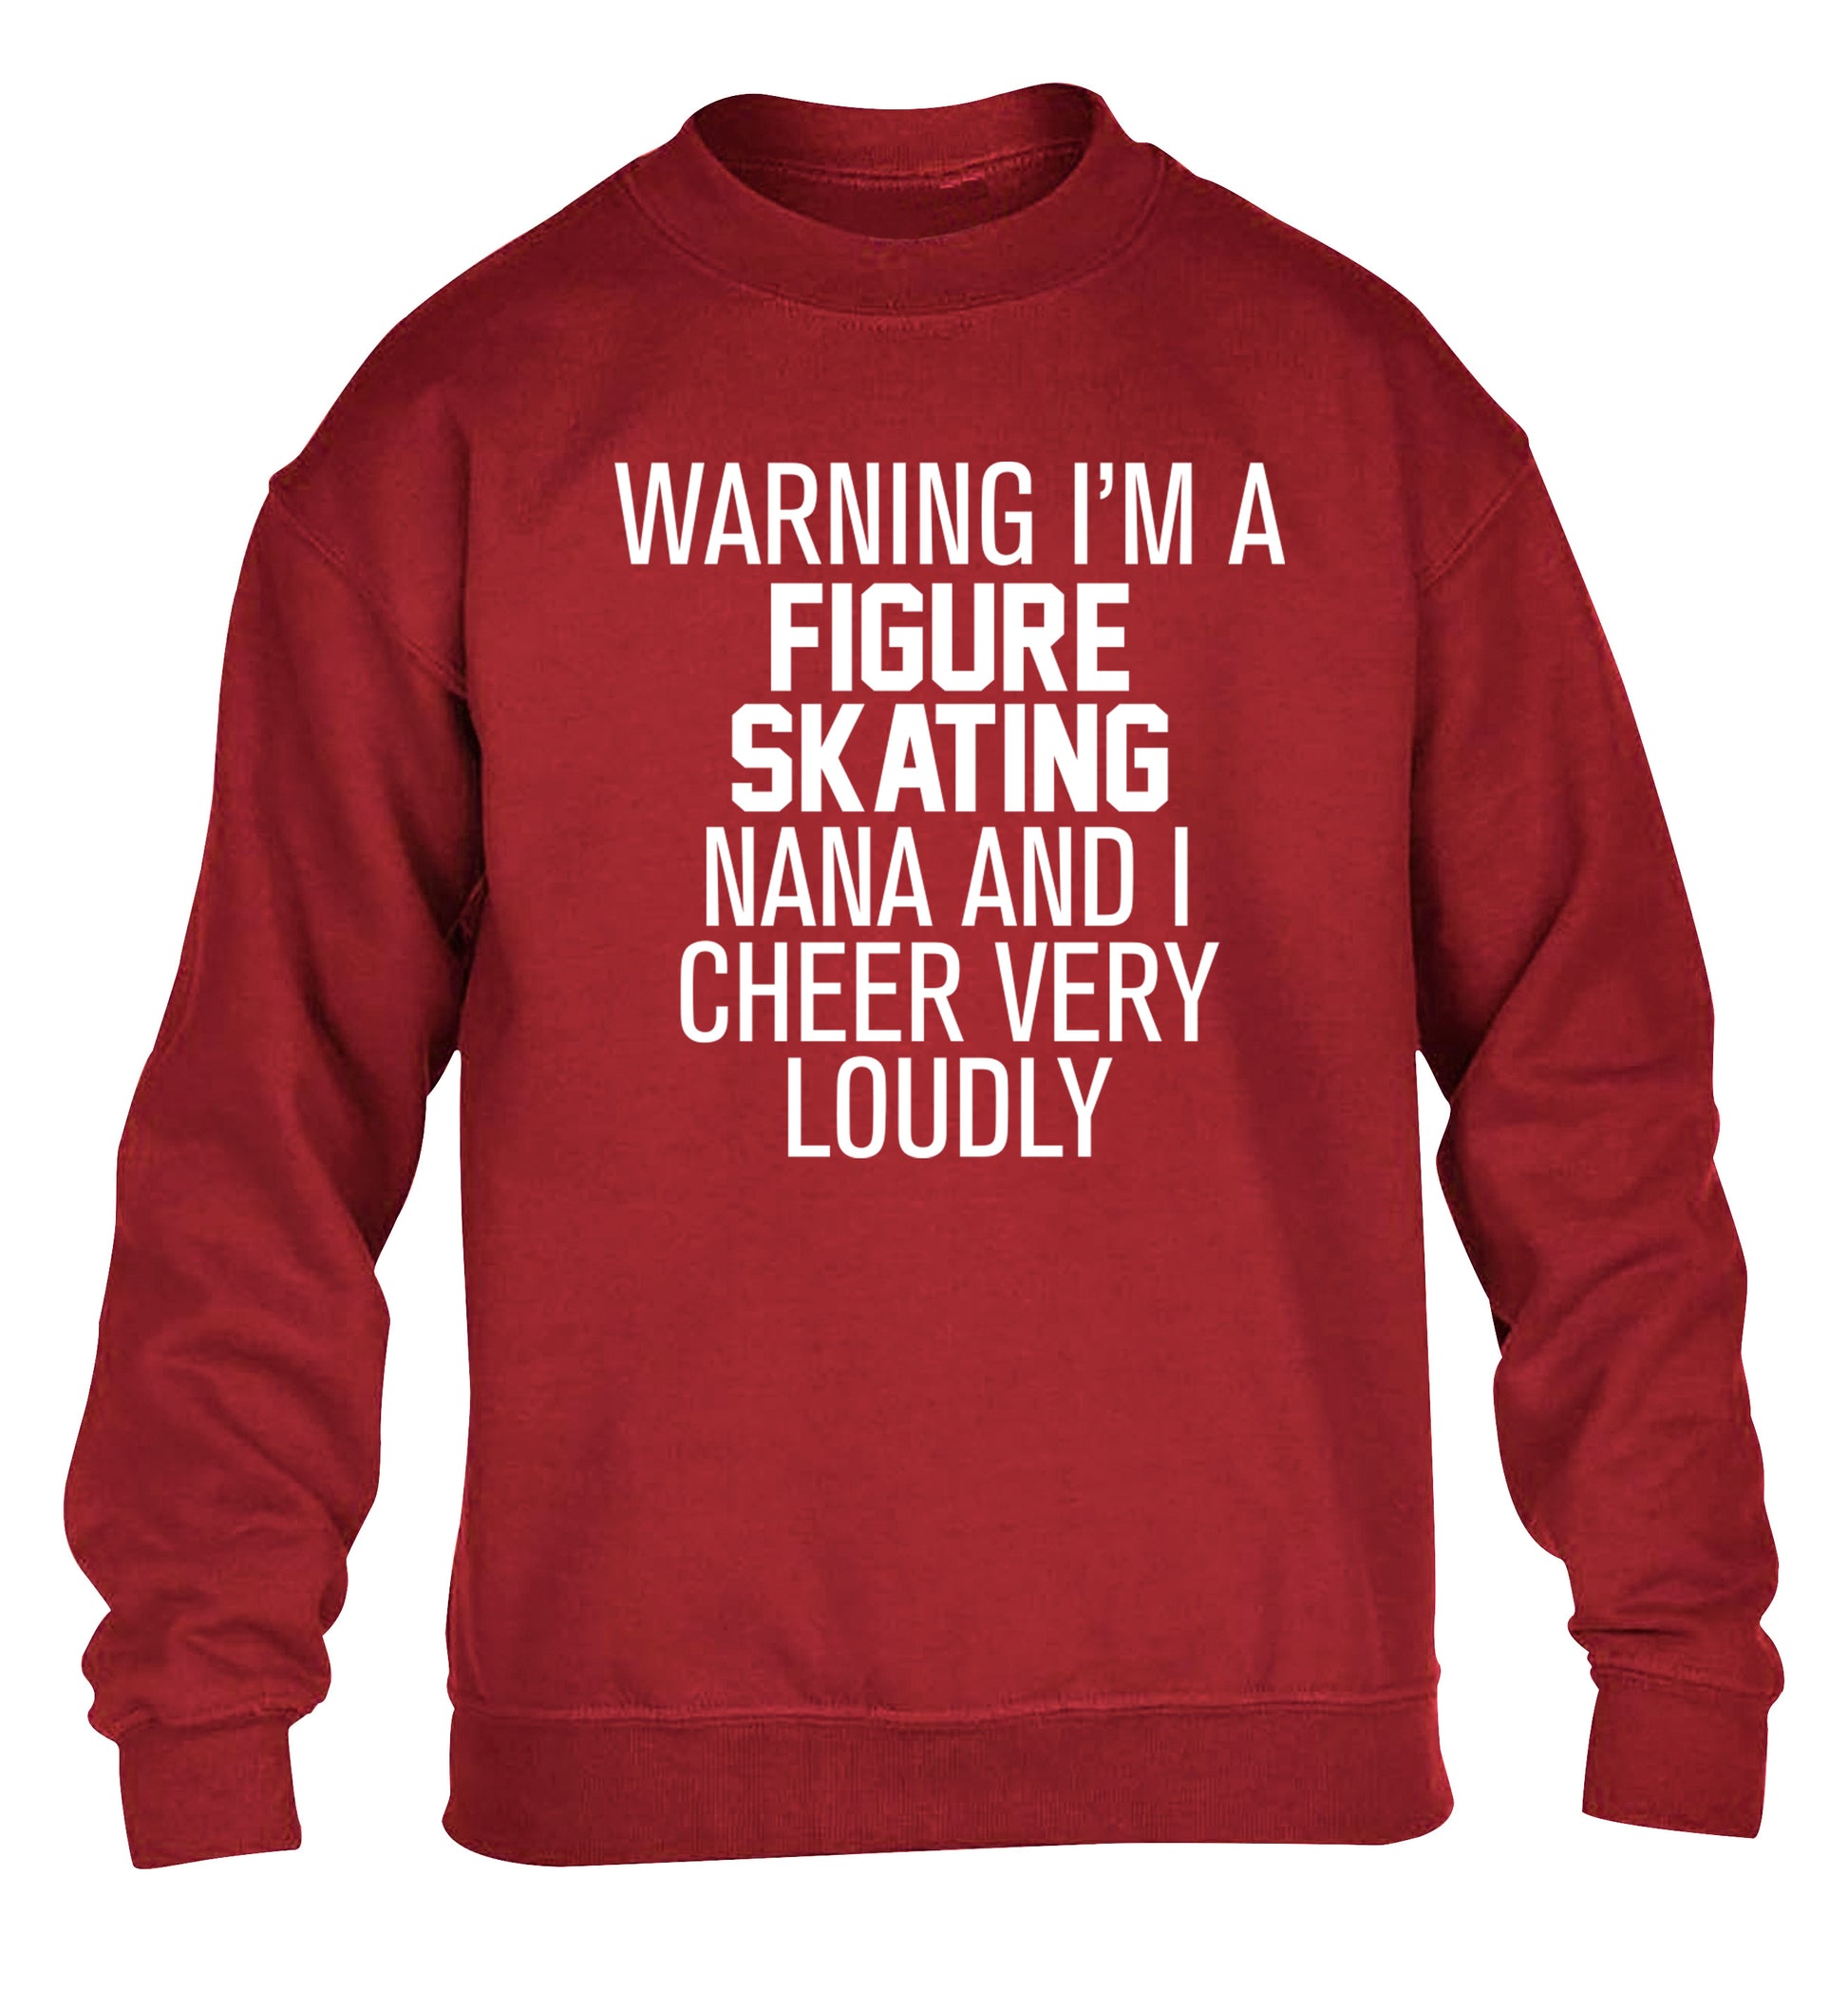 Warning I'm a figure skating nana and I cheer very loudly children's grey sweater 12-14 Years